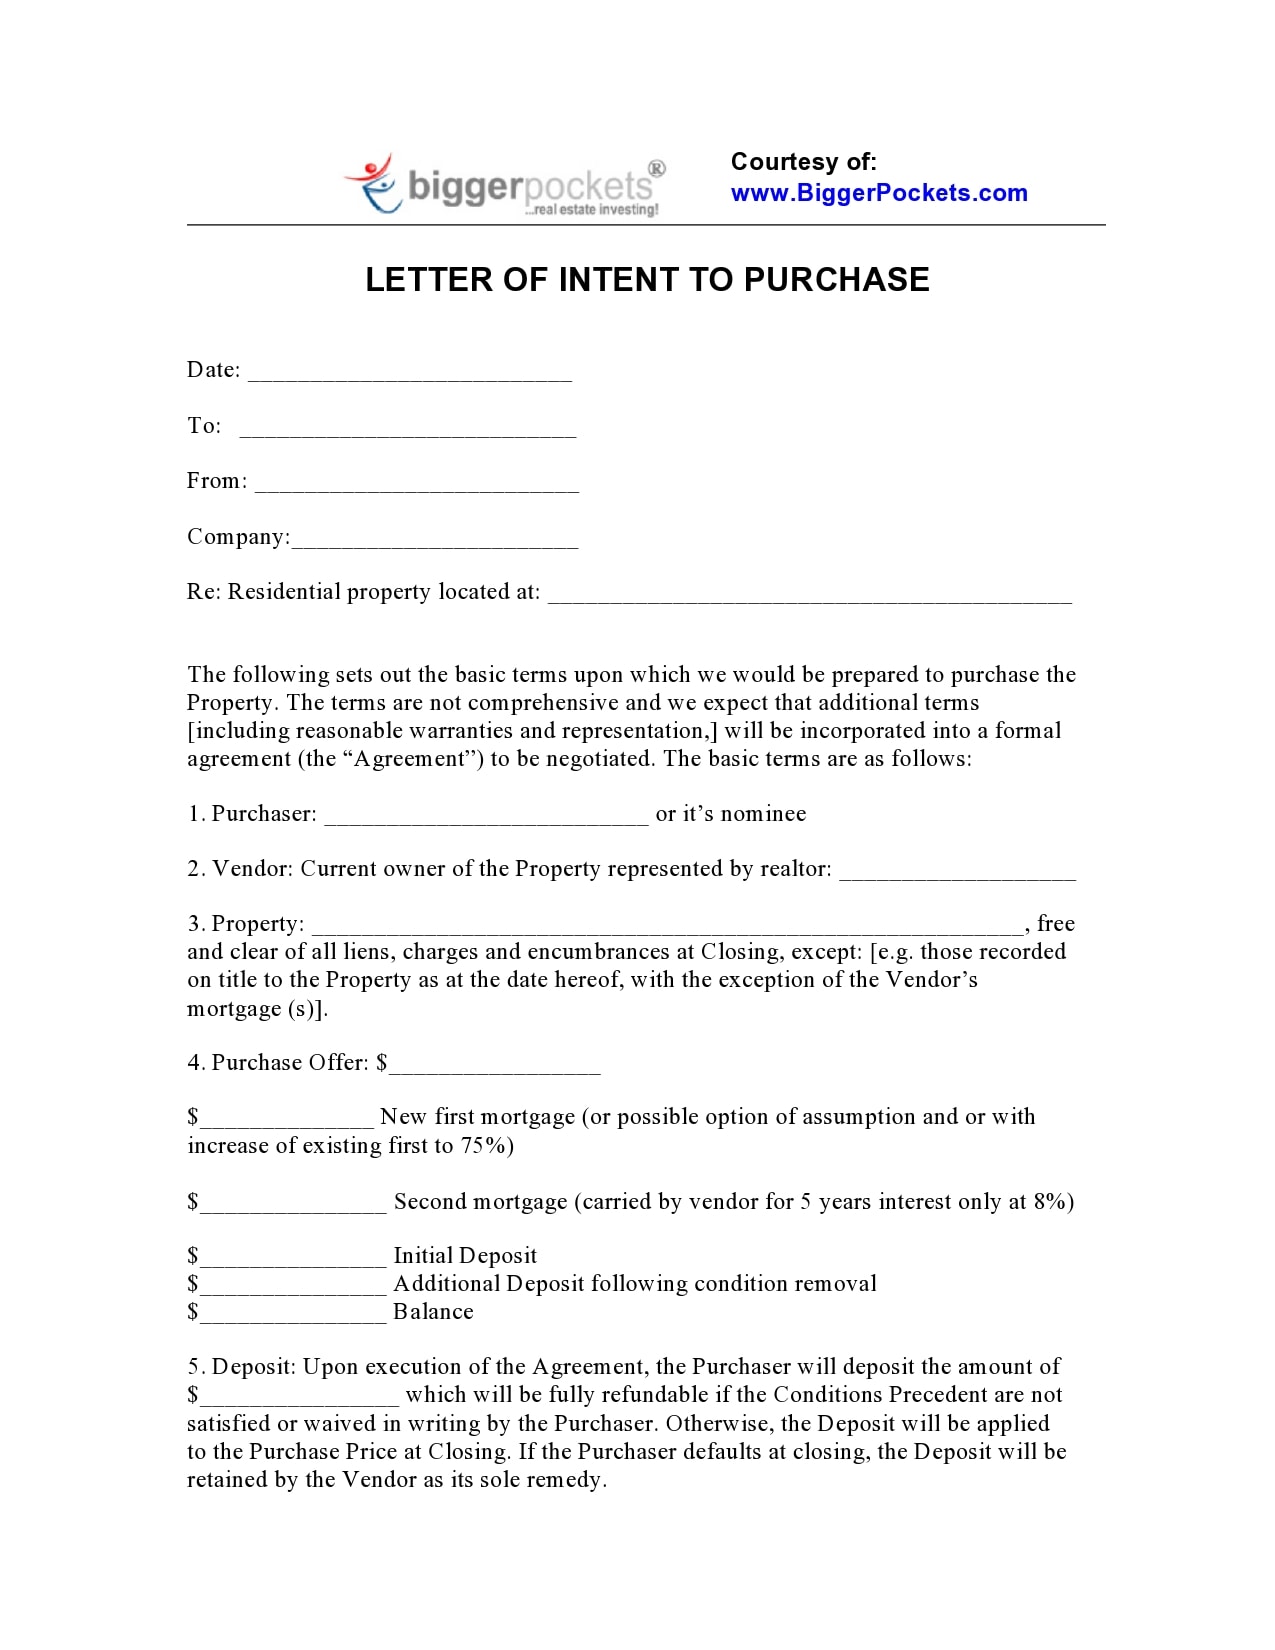 23 Free Letters of Intent to Purchase (Real Estate/Business/Land) For Letter Of Intent For Real Estate Purchase Template